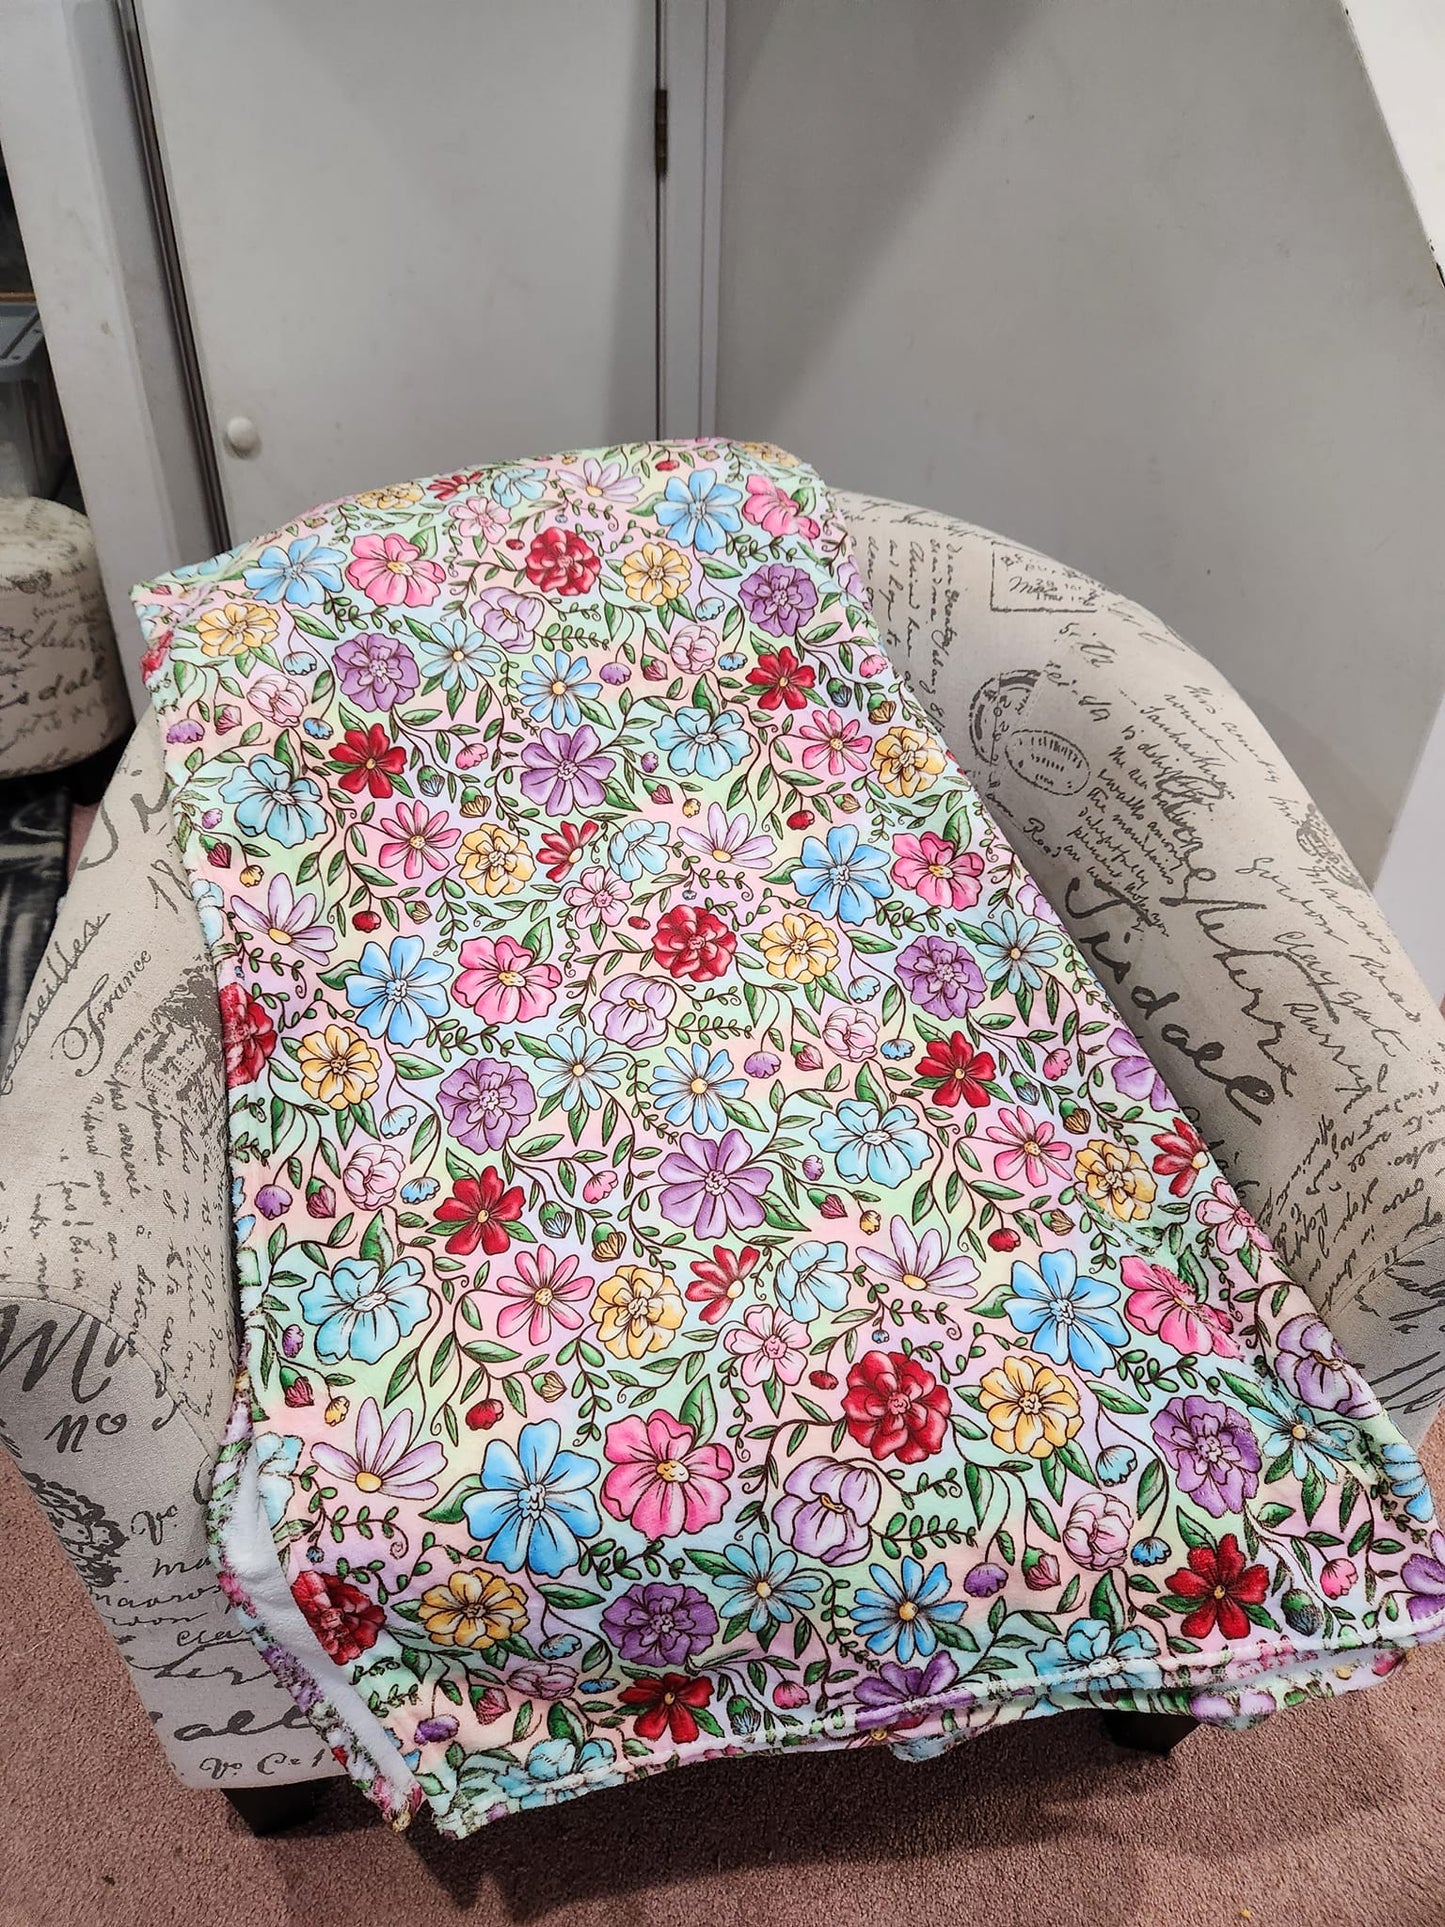 FLORAL PIGGIES- GIANT SHAREABLE THROW BLANKETS